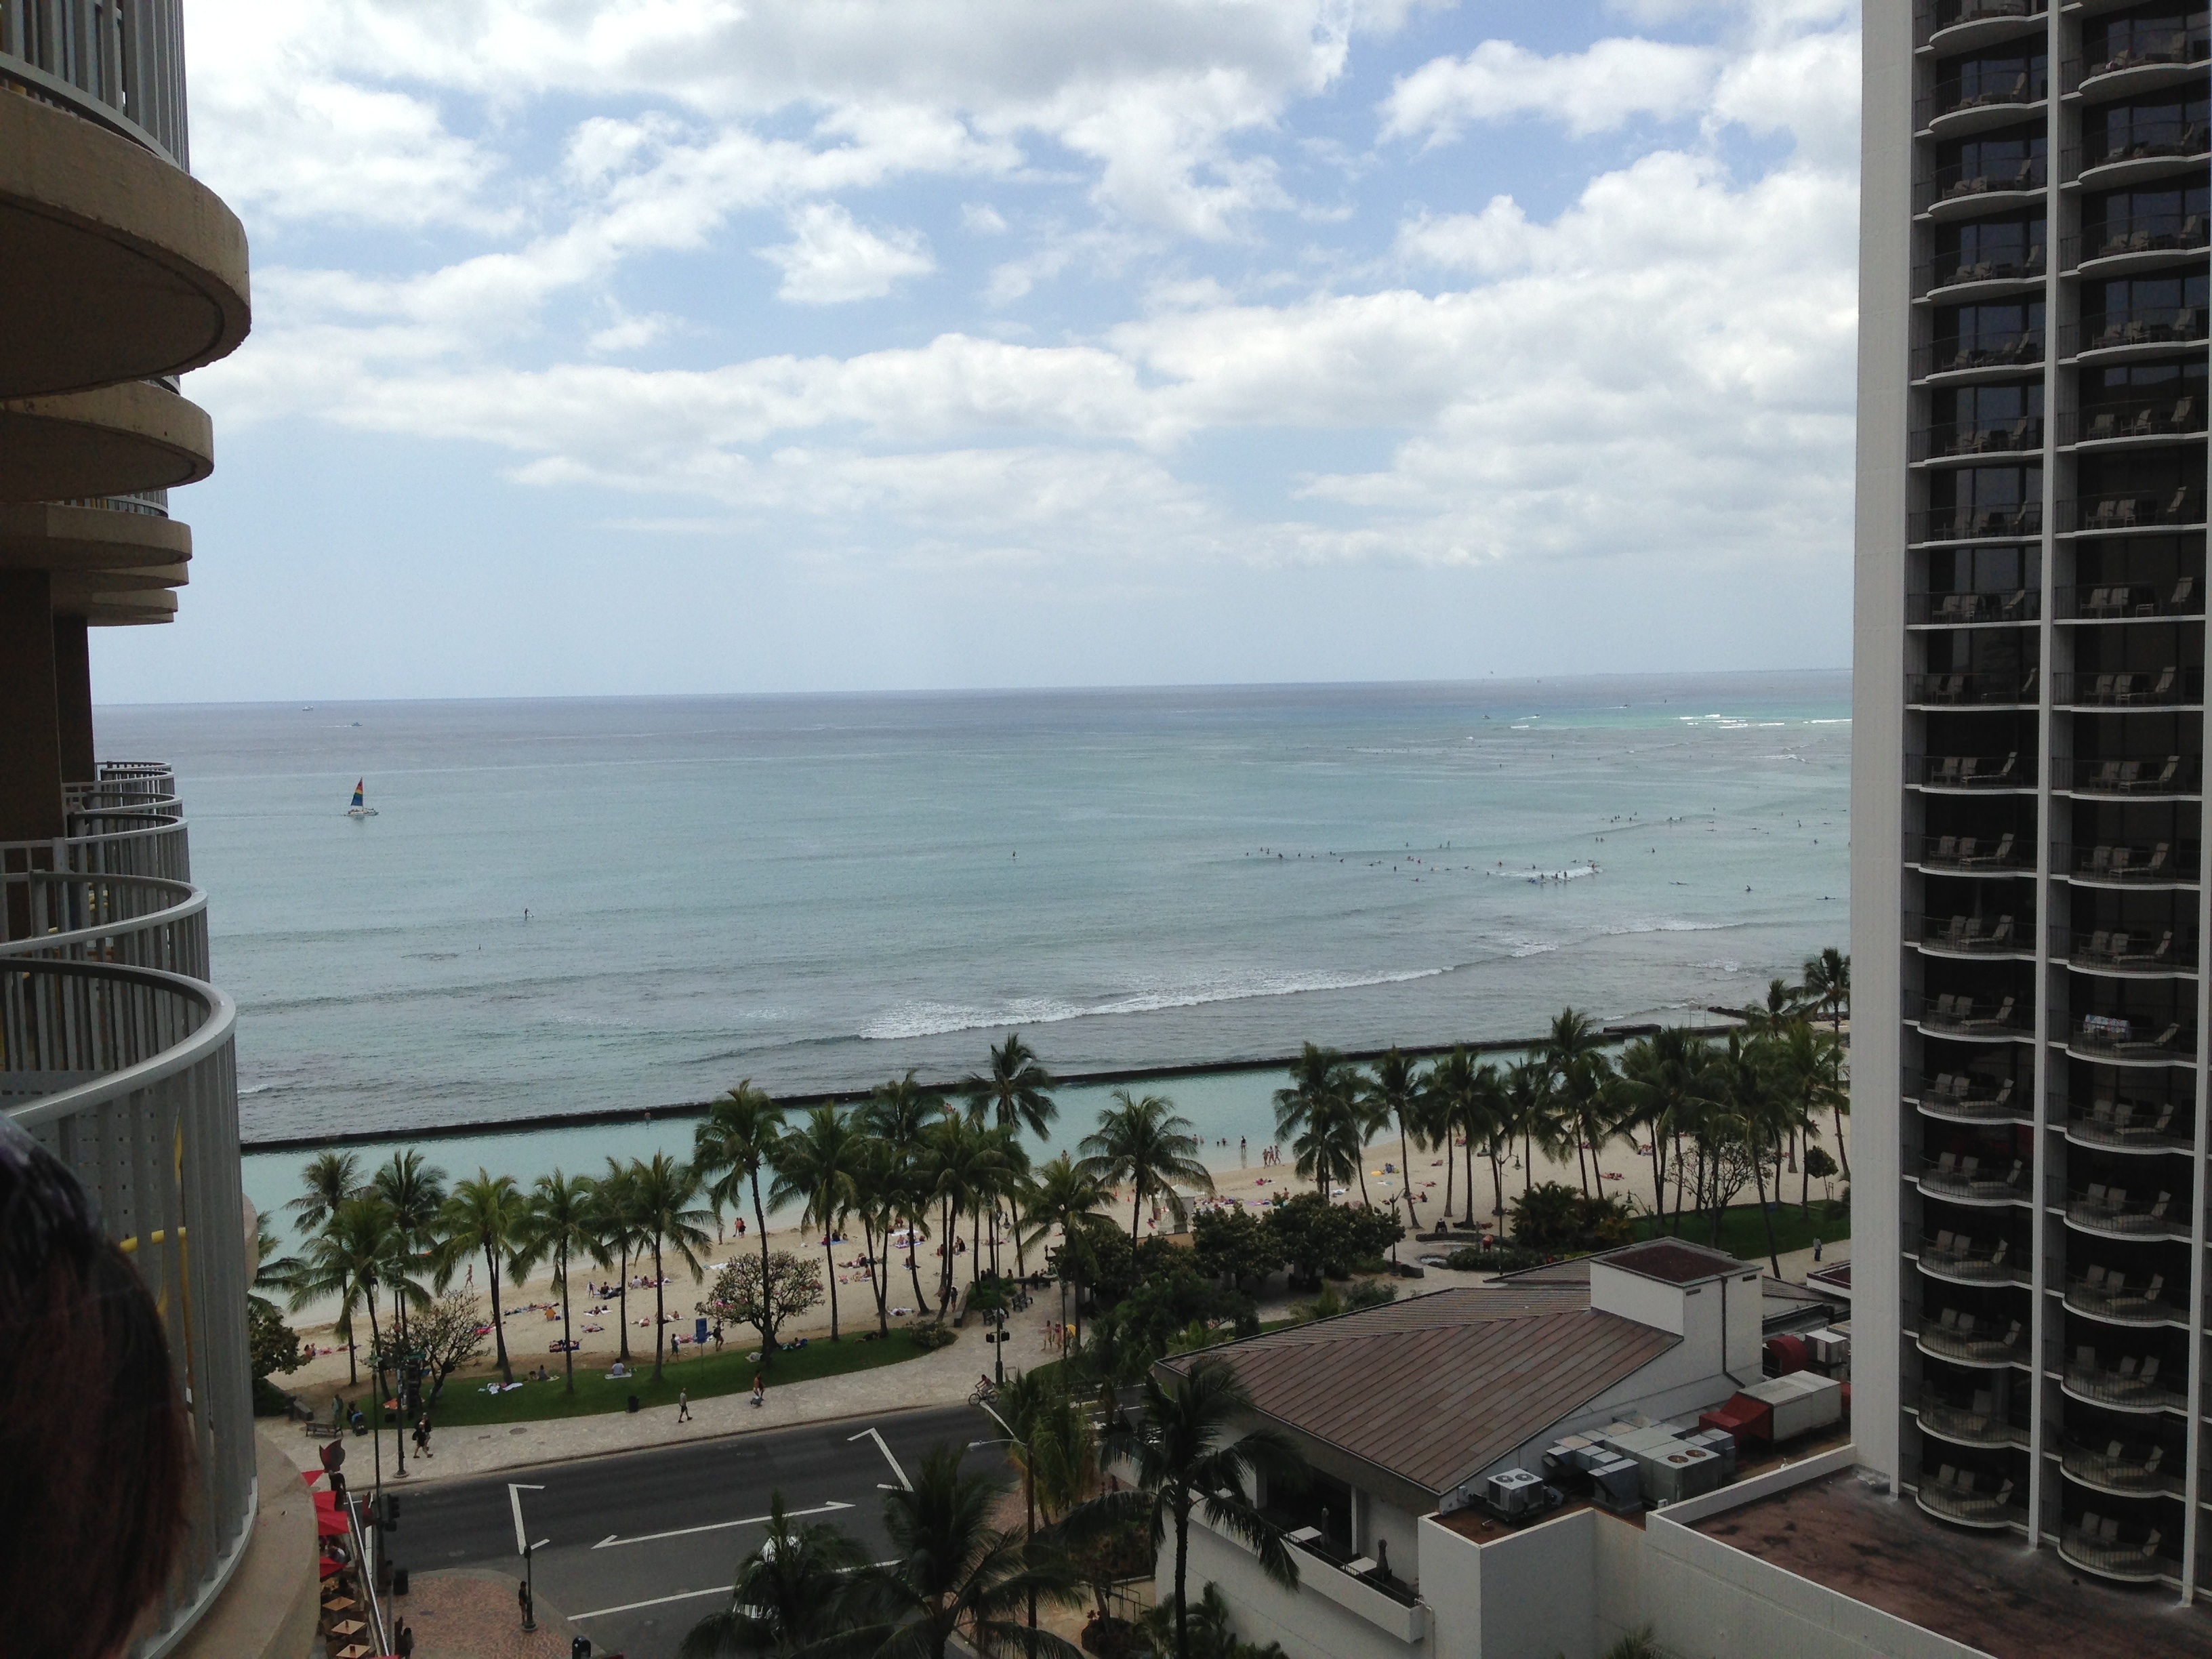 This was my view in Oahu, HAwaii